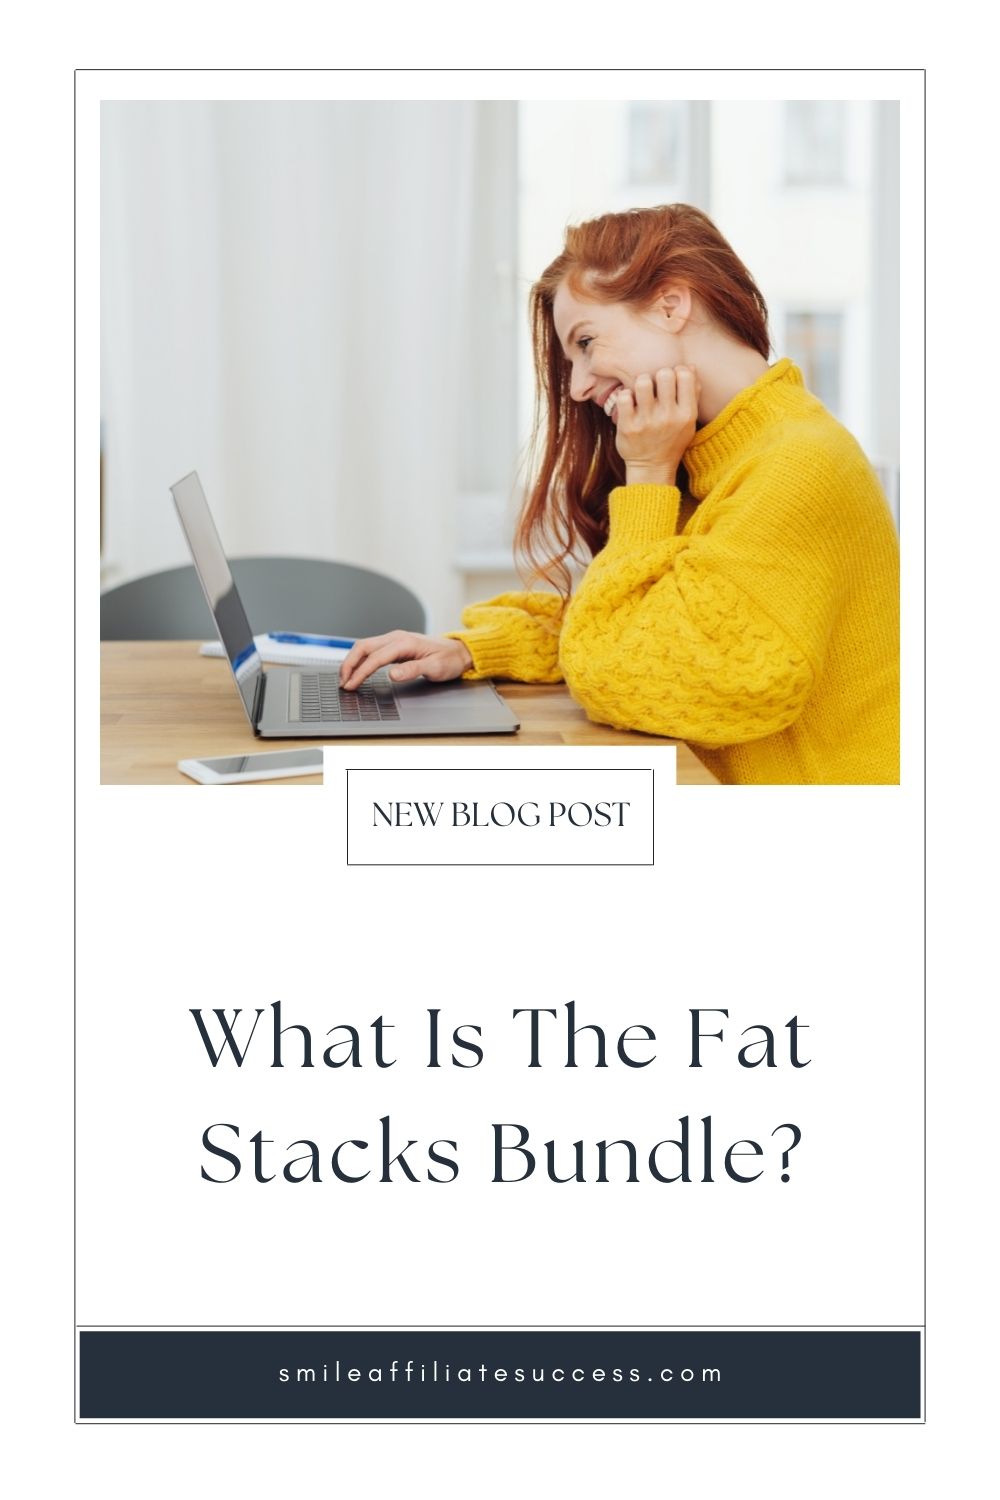 What Is The Fat Stacks Bundle?